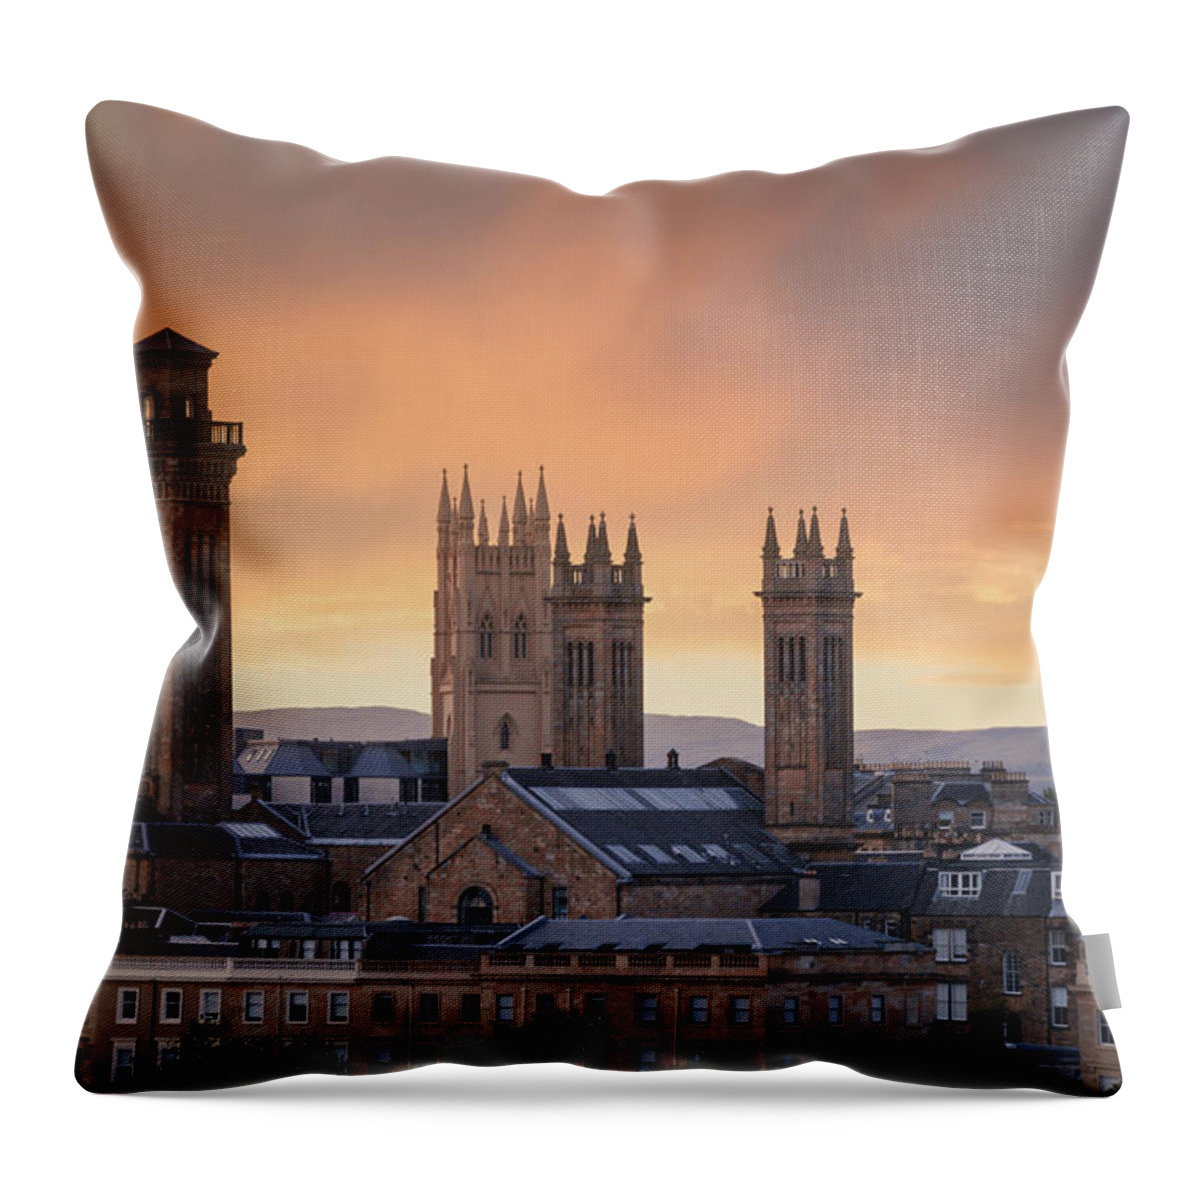 Orange Throw Pillow featuring the photograph A Glasgow City View by Rick Deacon